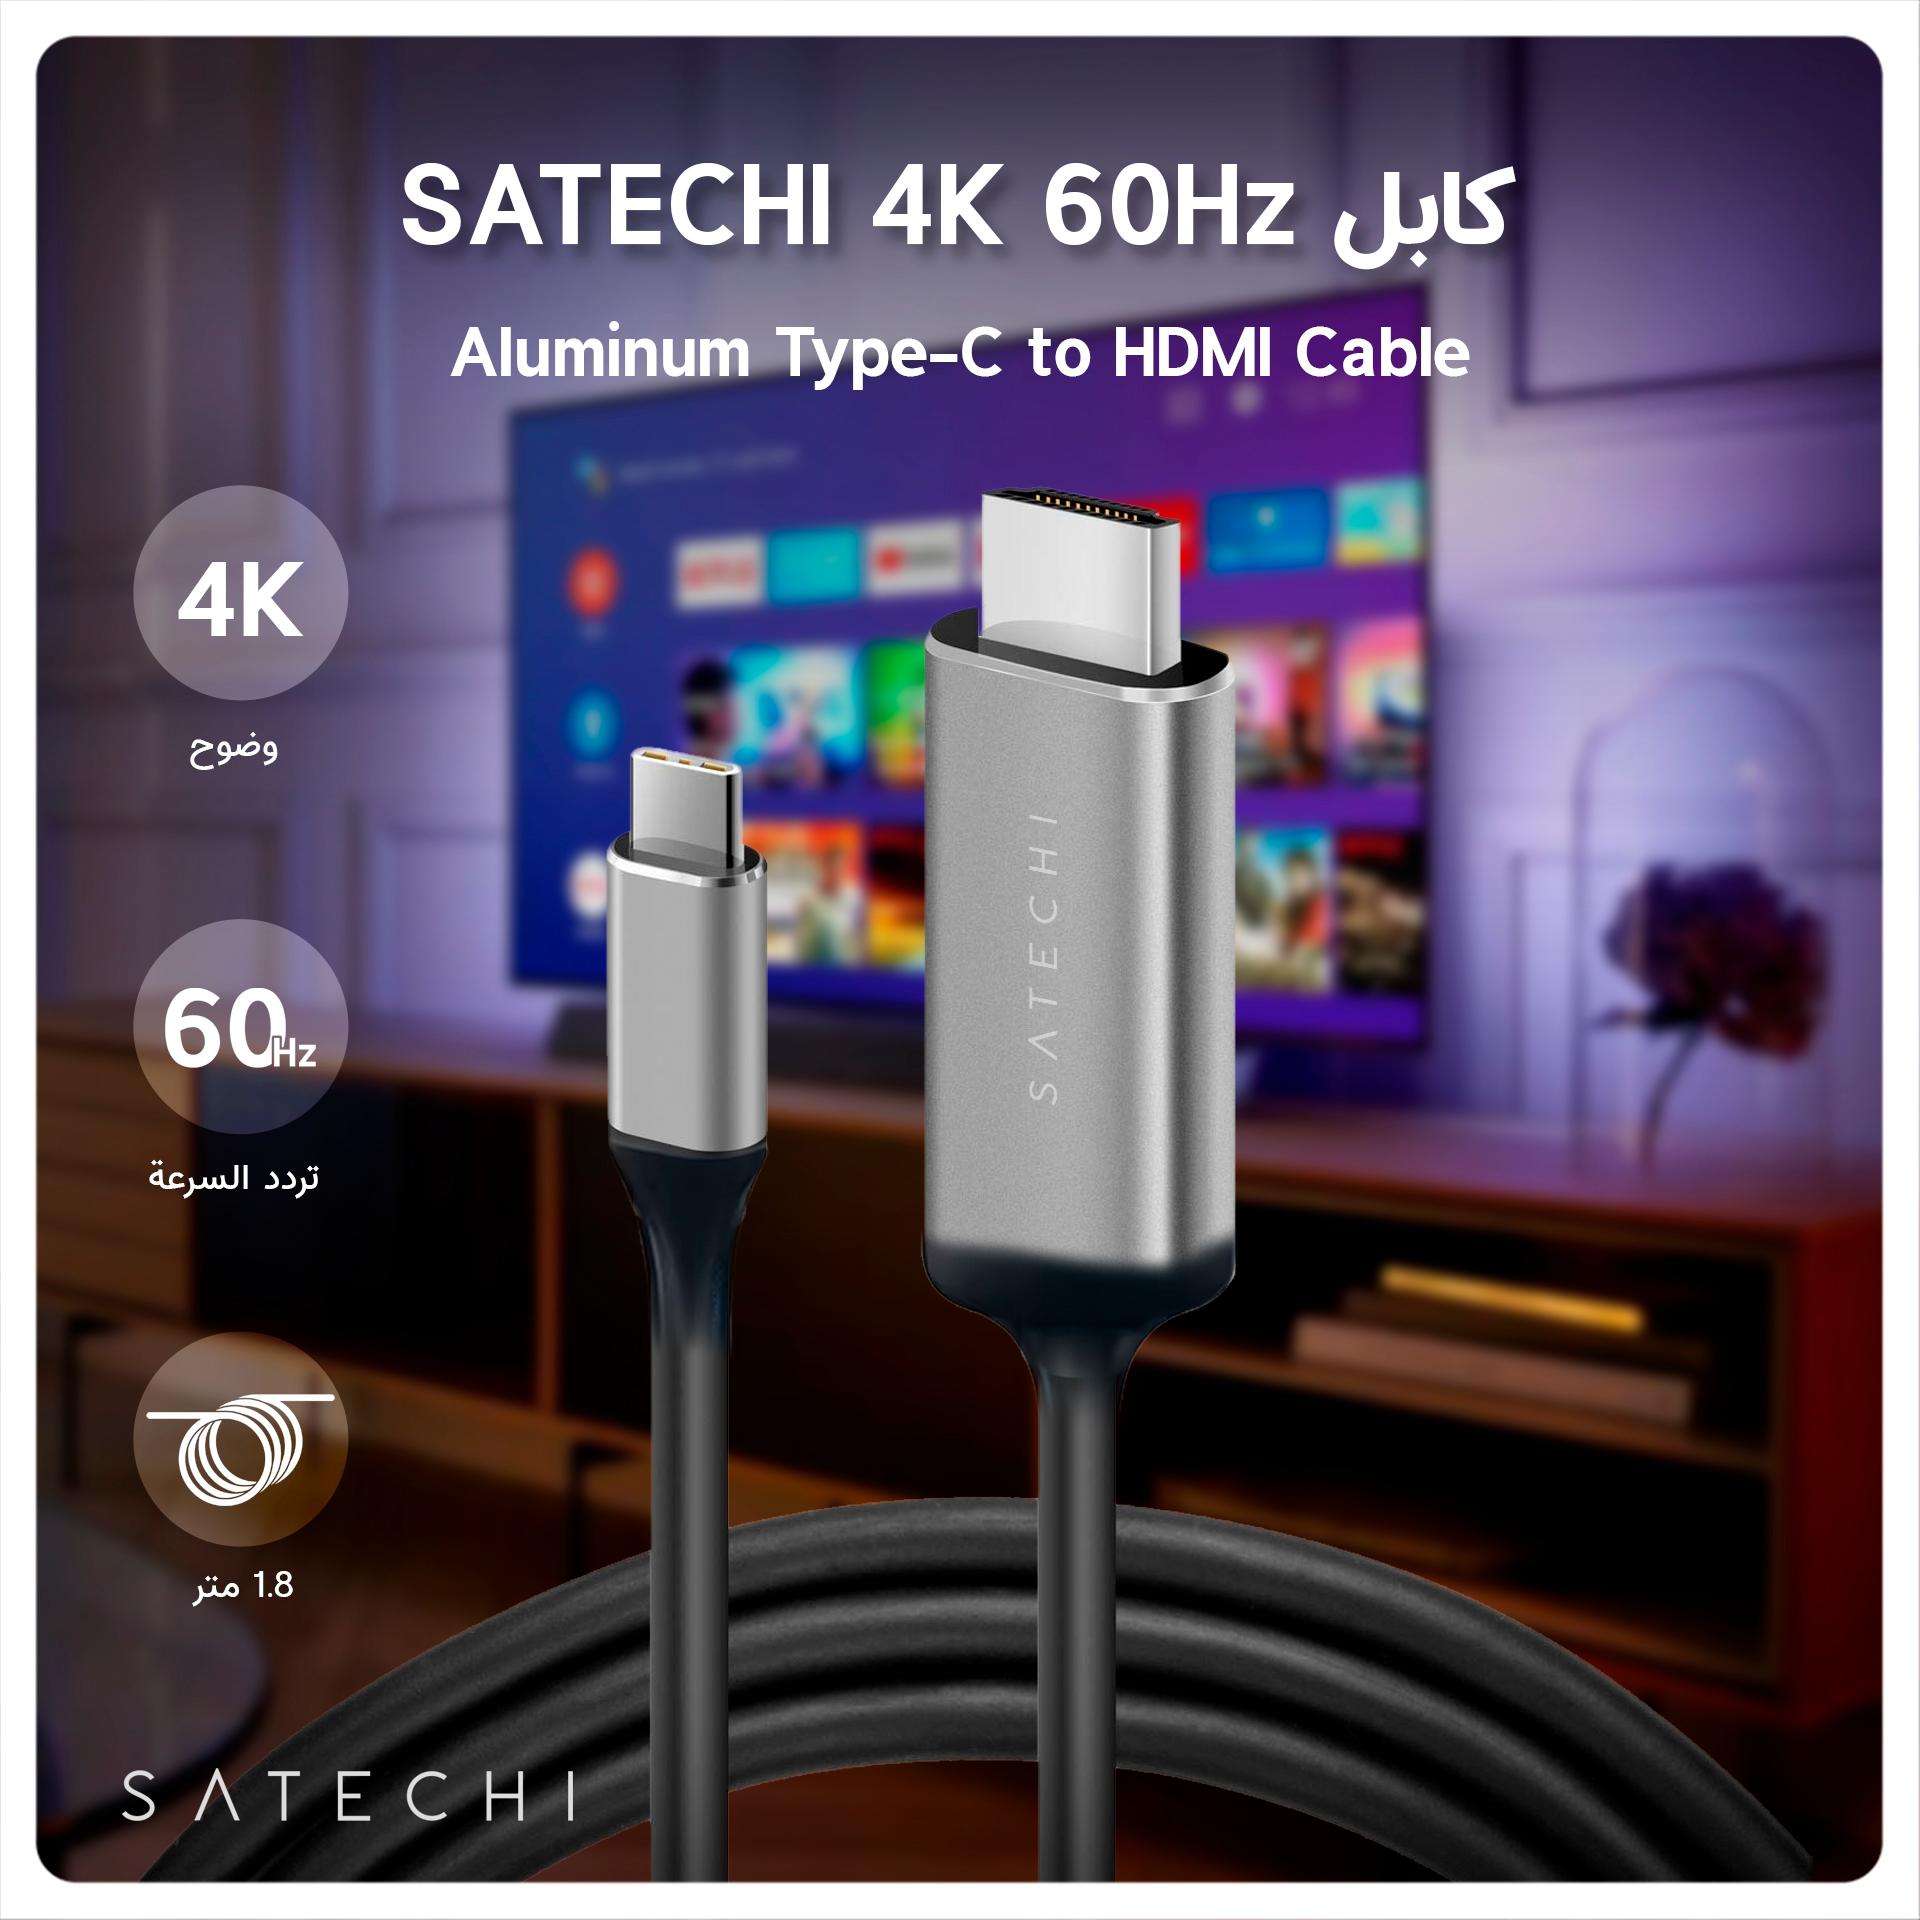 satechi aluminum type c to hdmi cable 4k 60hz space gray